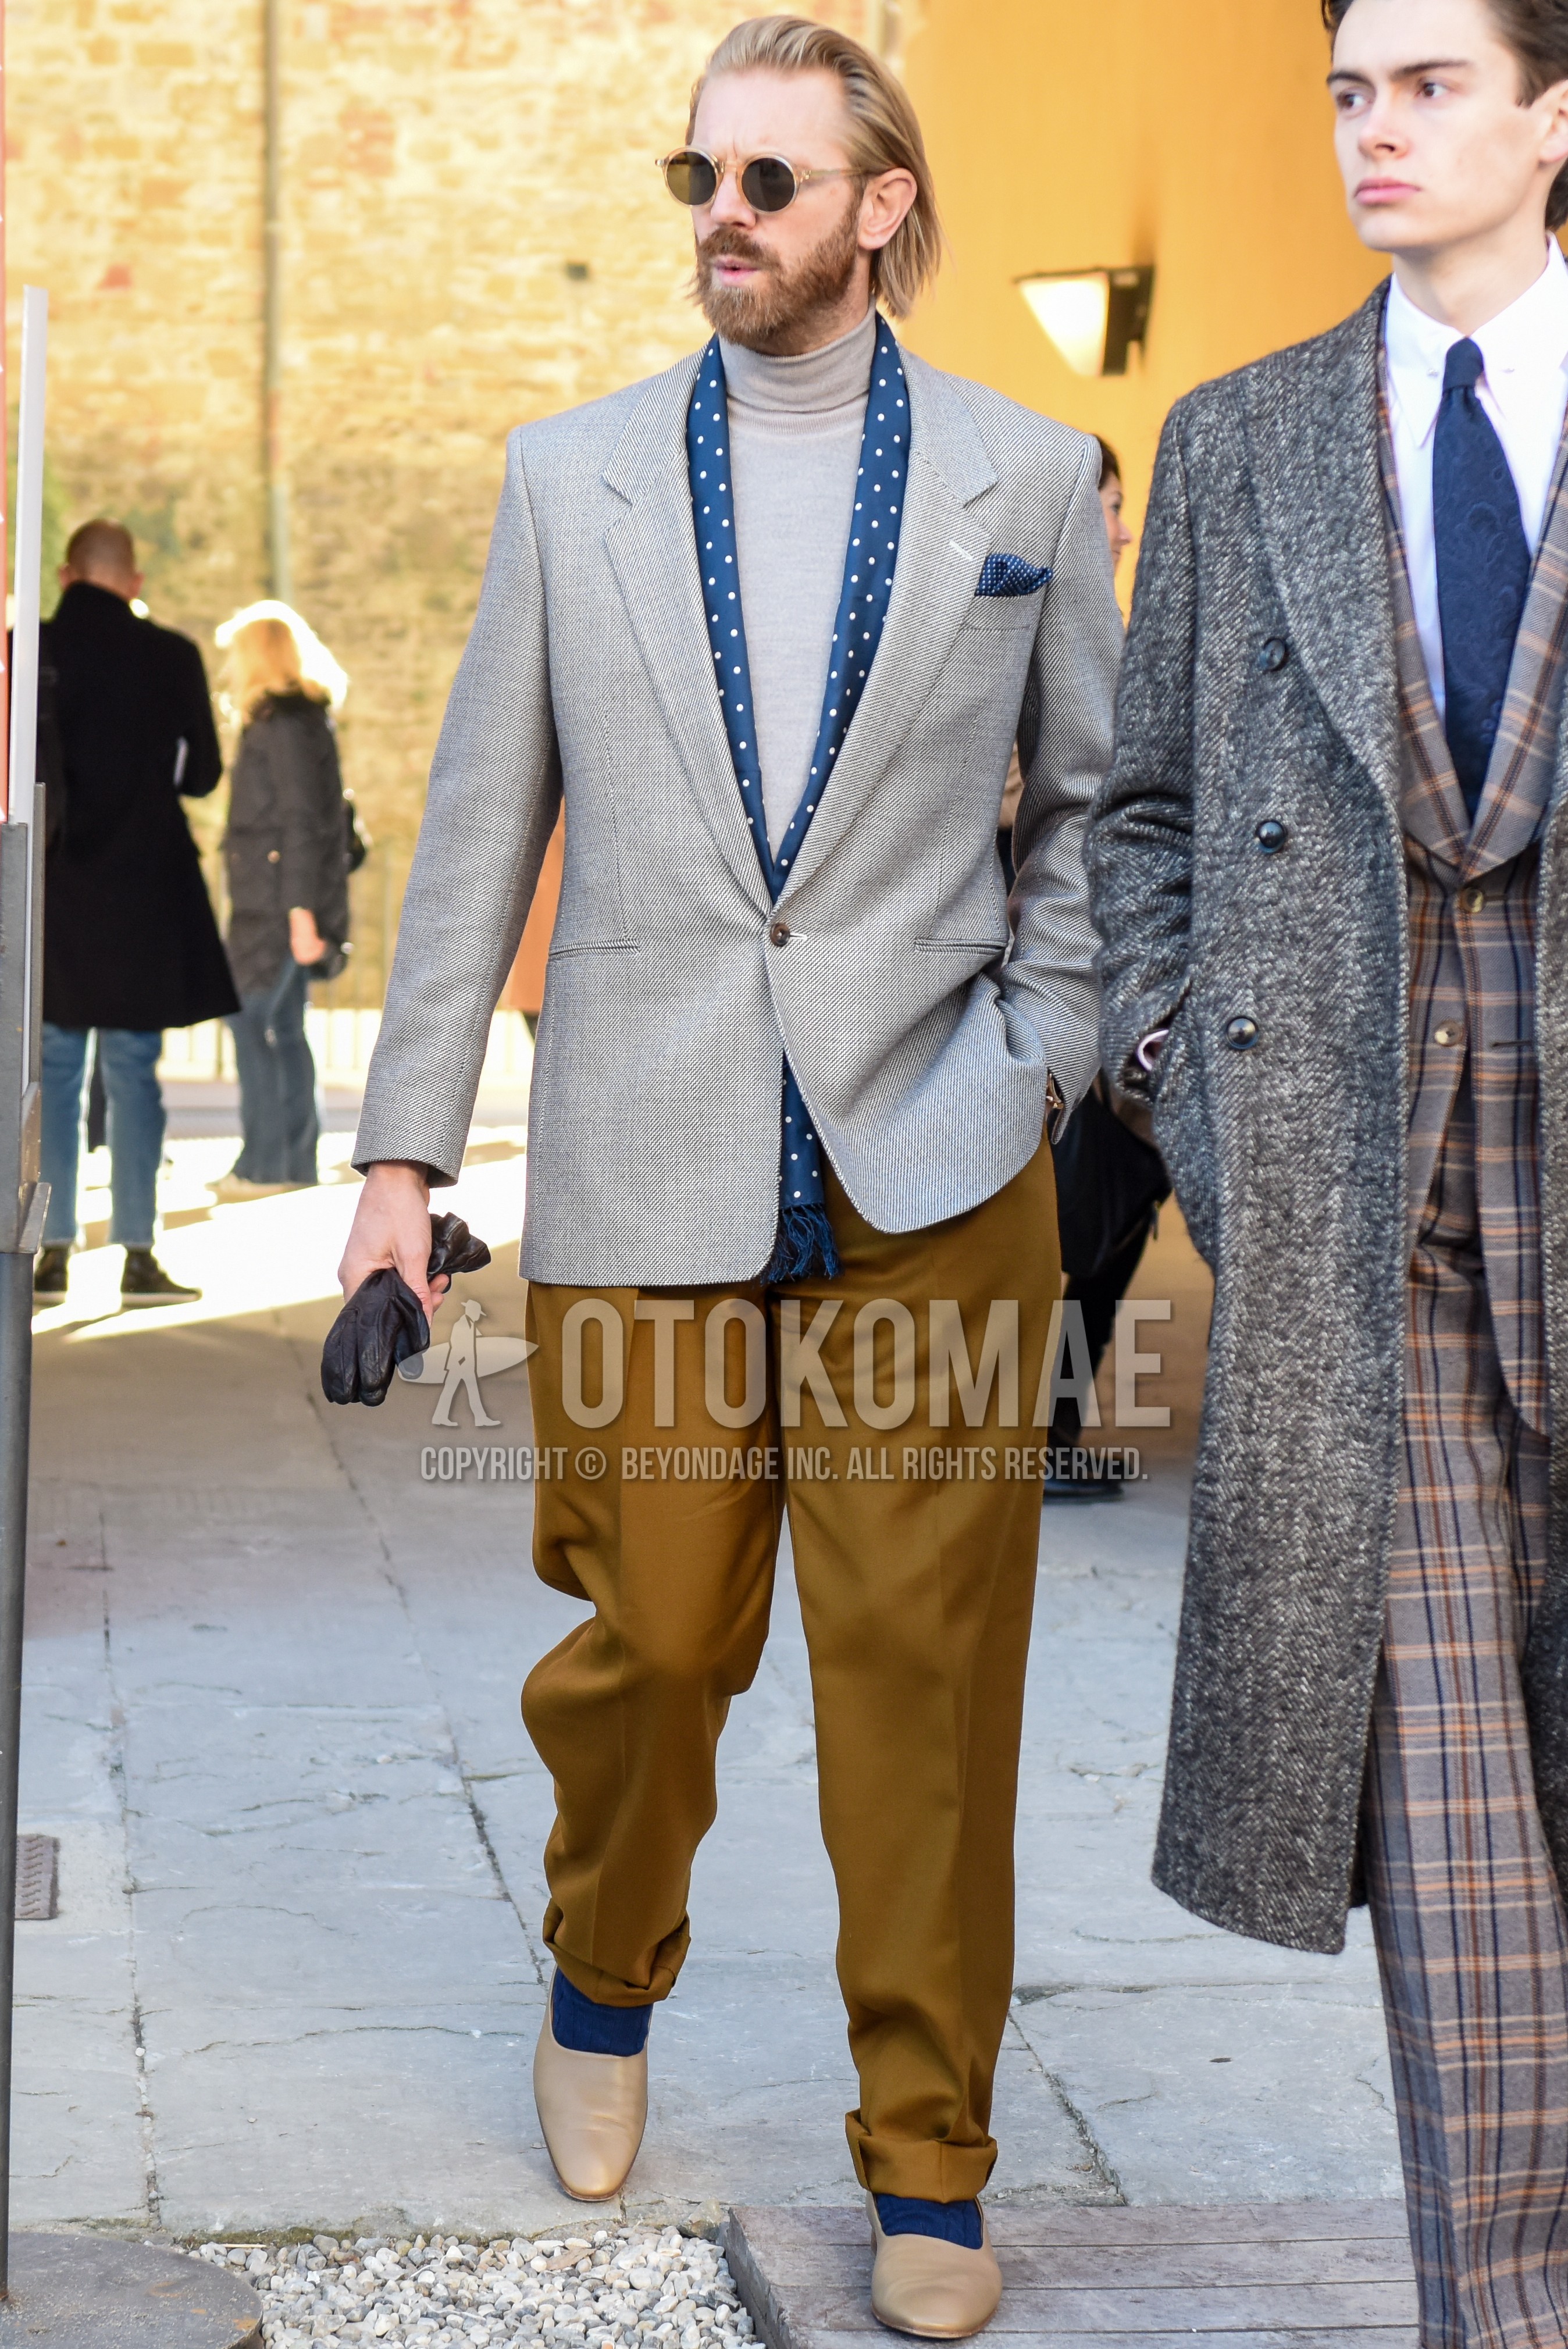 Men's spring autumn outfit with clear plain sunglasses, navy dots scarf, gray plain tailored jacket, gray plain turtleneck knit, beige plain chinos, beige plain pleated pants, navy plain socks, beige  loafers leather shoes.